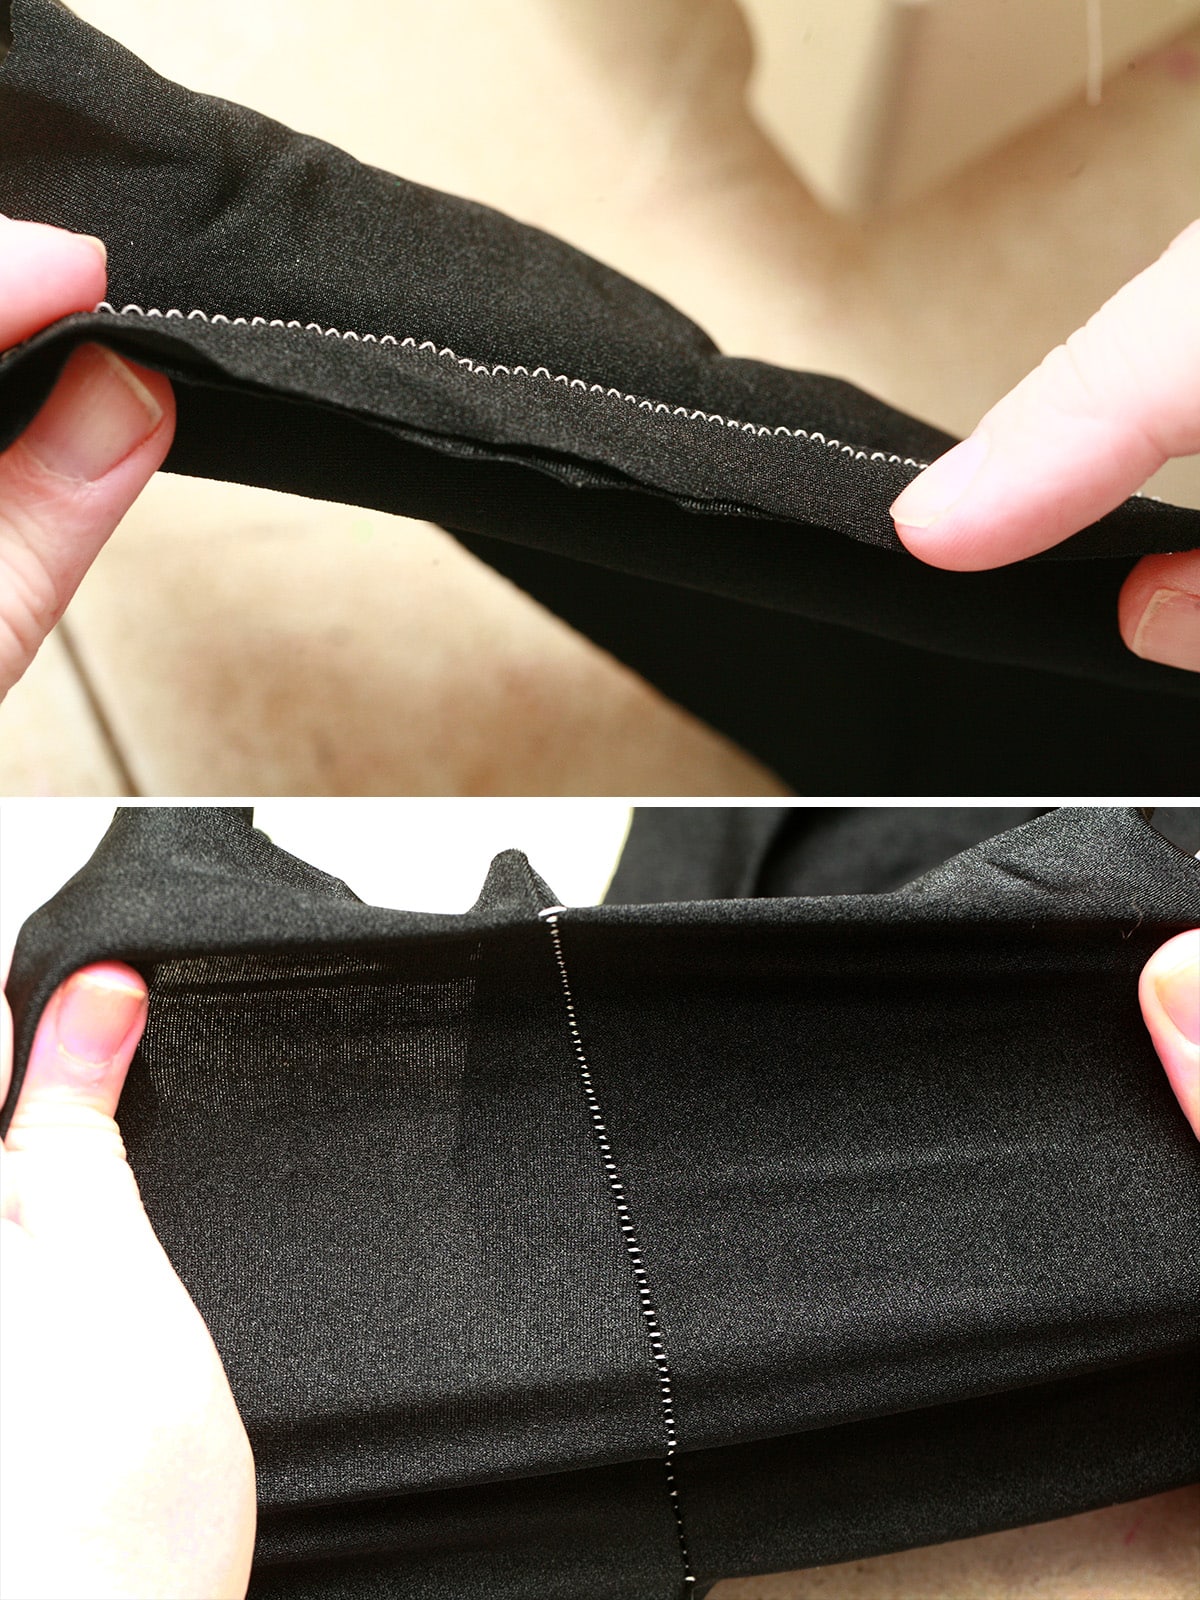 A two part compilation image showing a too-loose seam sewn into spandex.